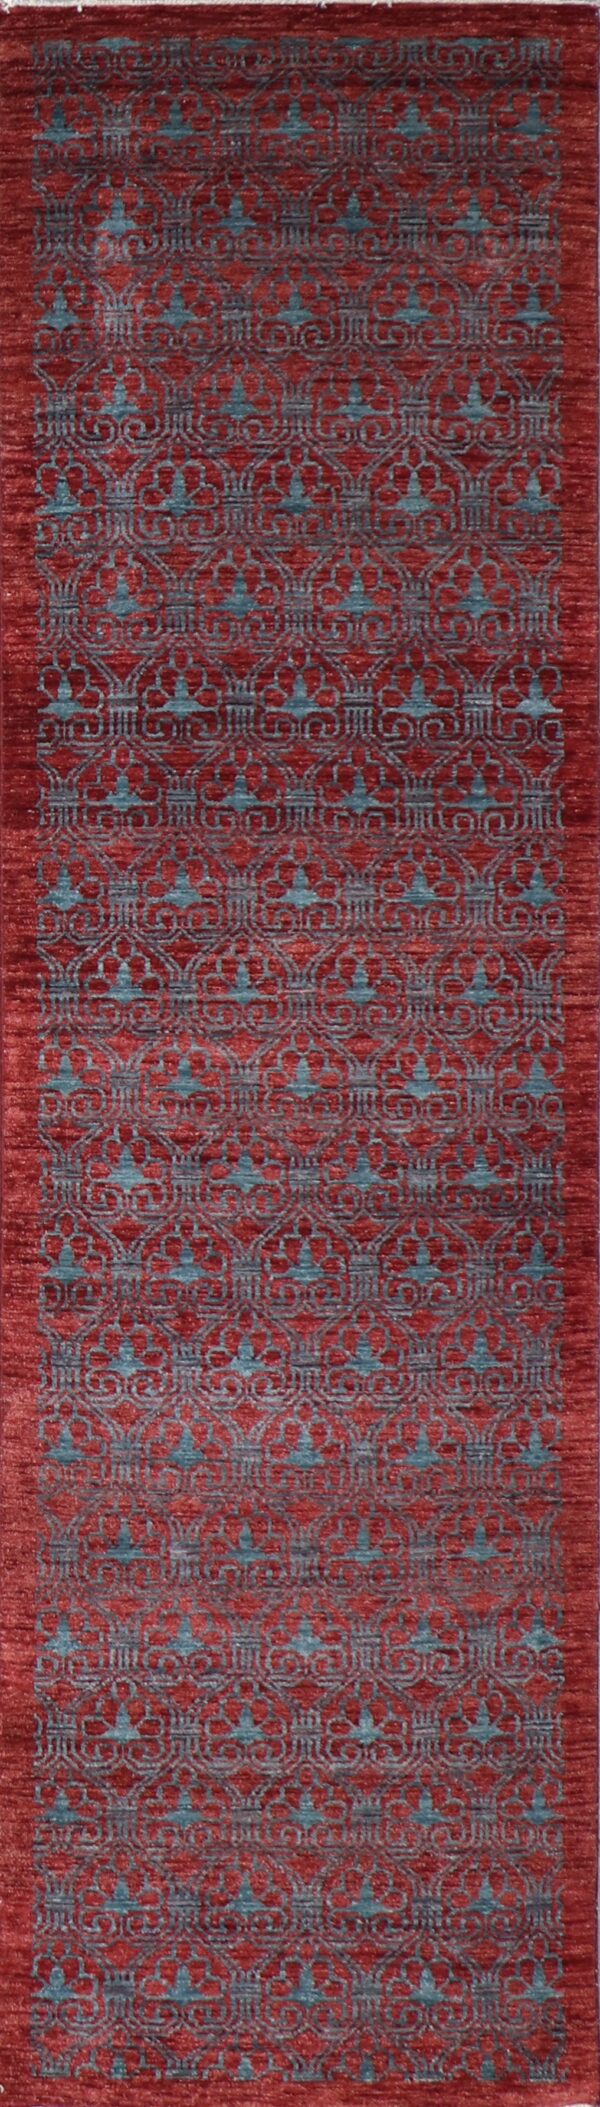 2’8”x10’2” Transitional Red Wool Hand-Knotted Rug - Direct Rug Import | Rugs in Chicago, Indiana,South Bend,Granger